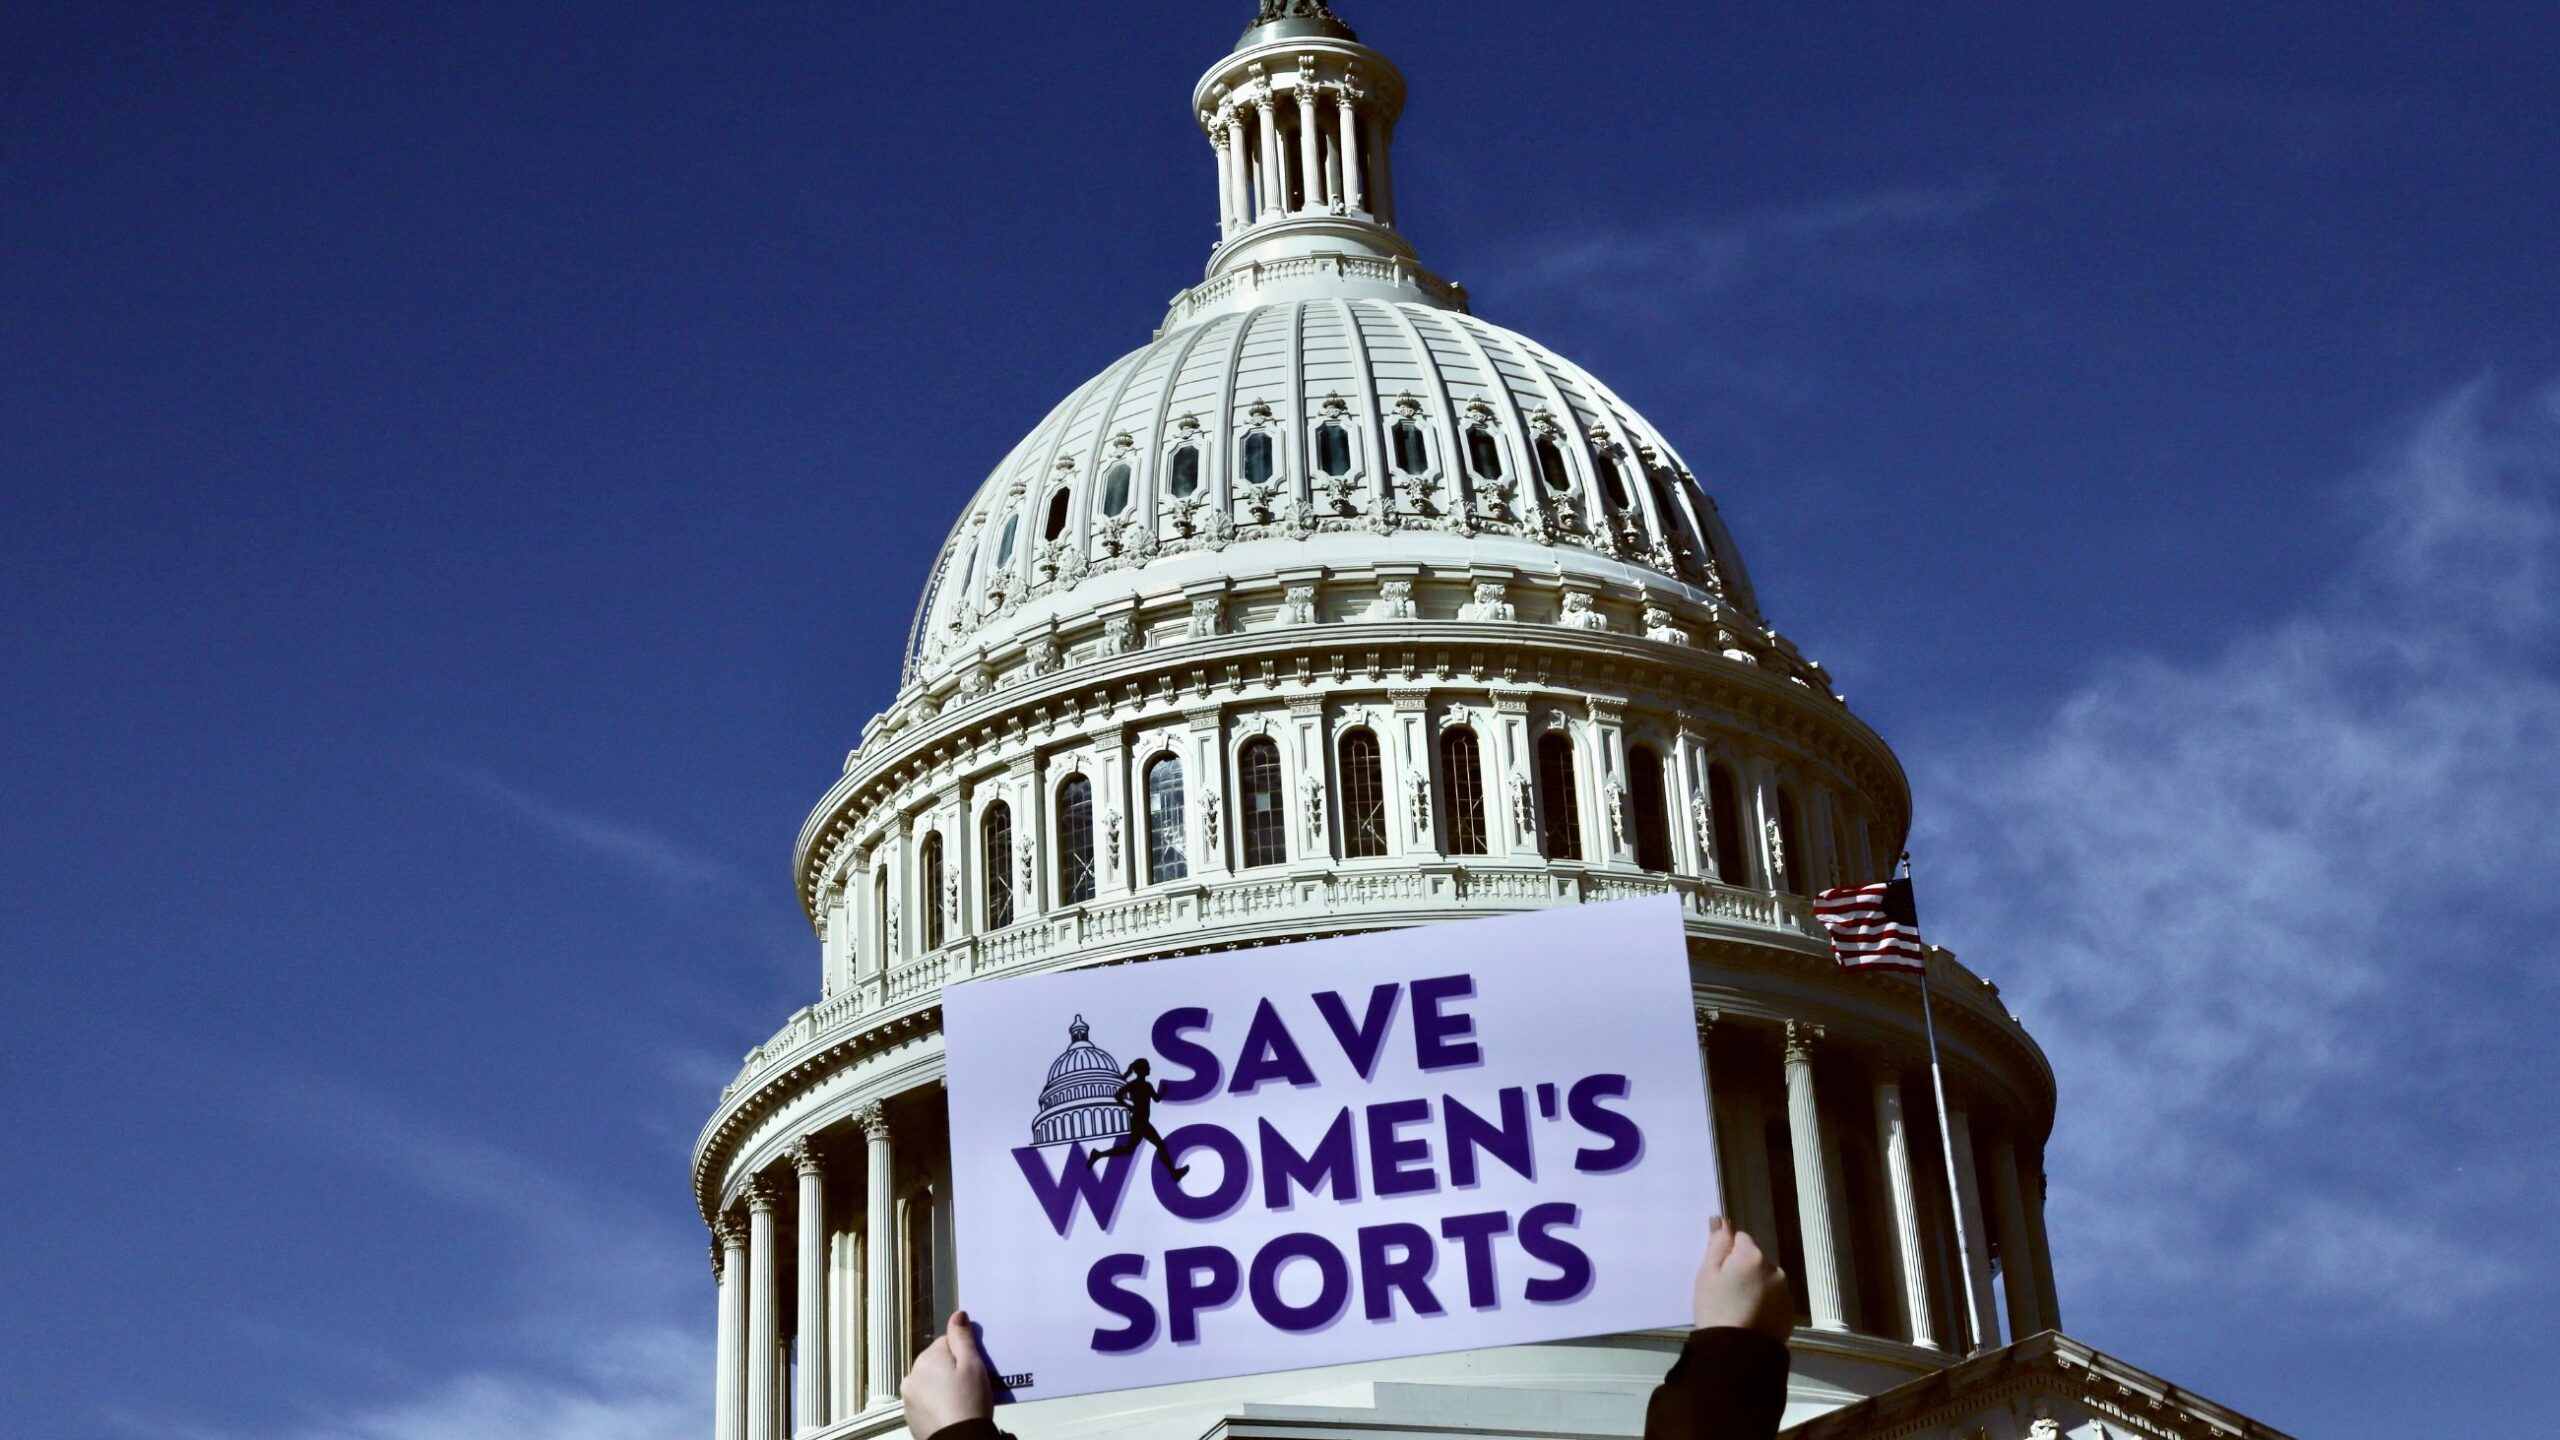 Protect Women and Girls in Sports